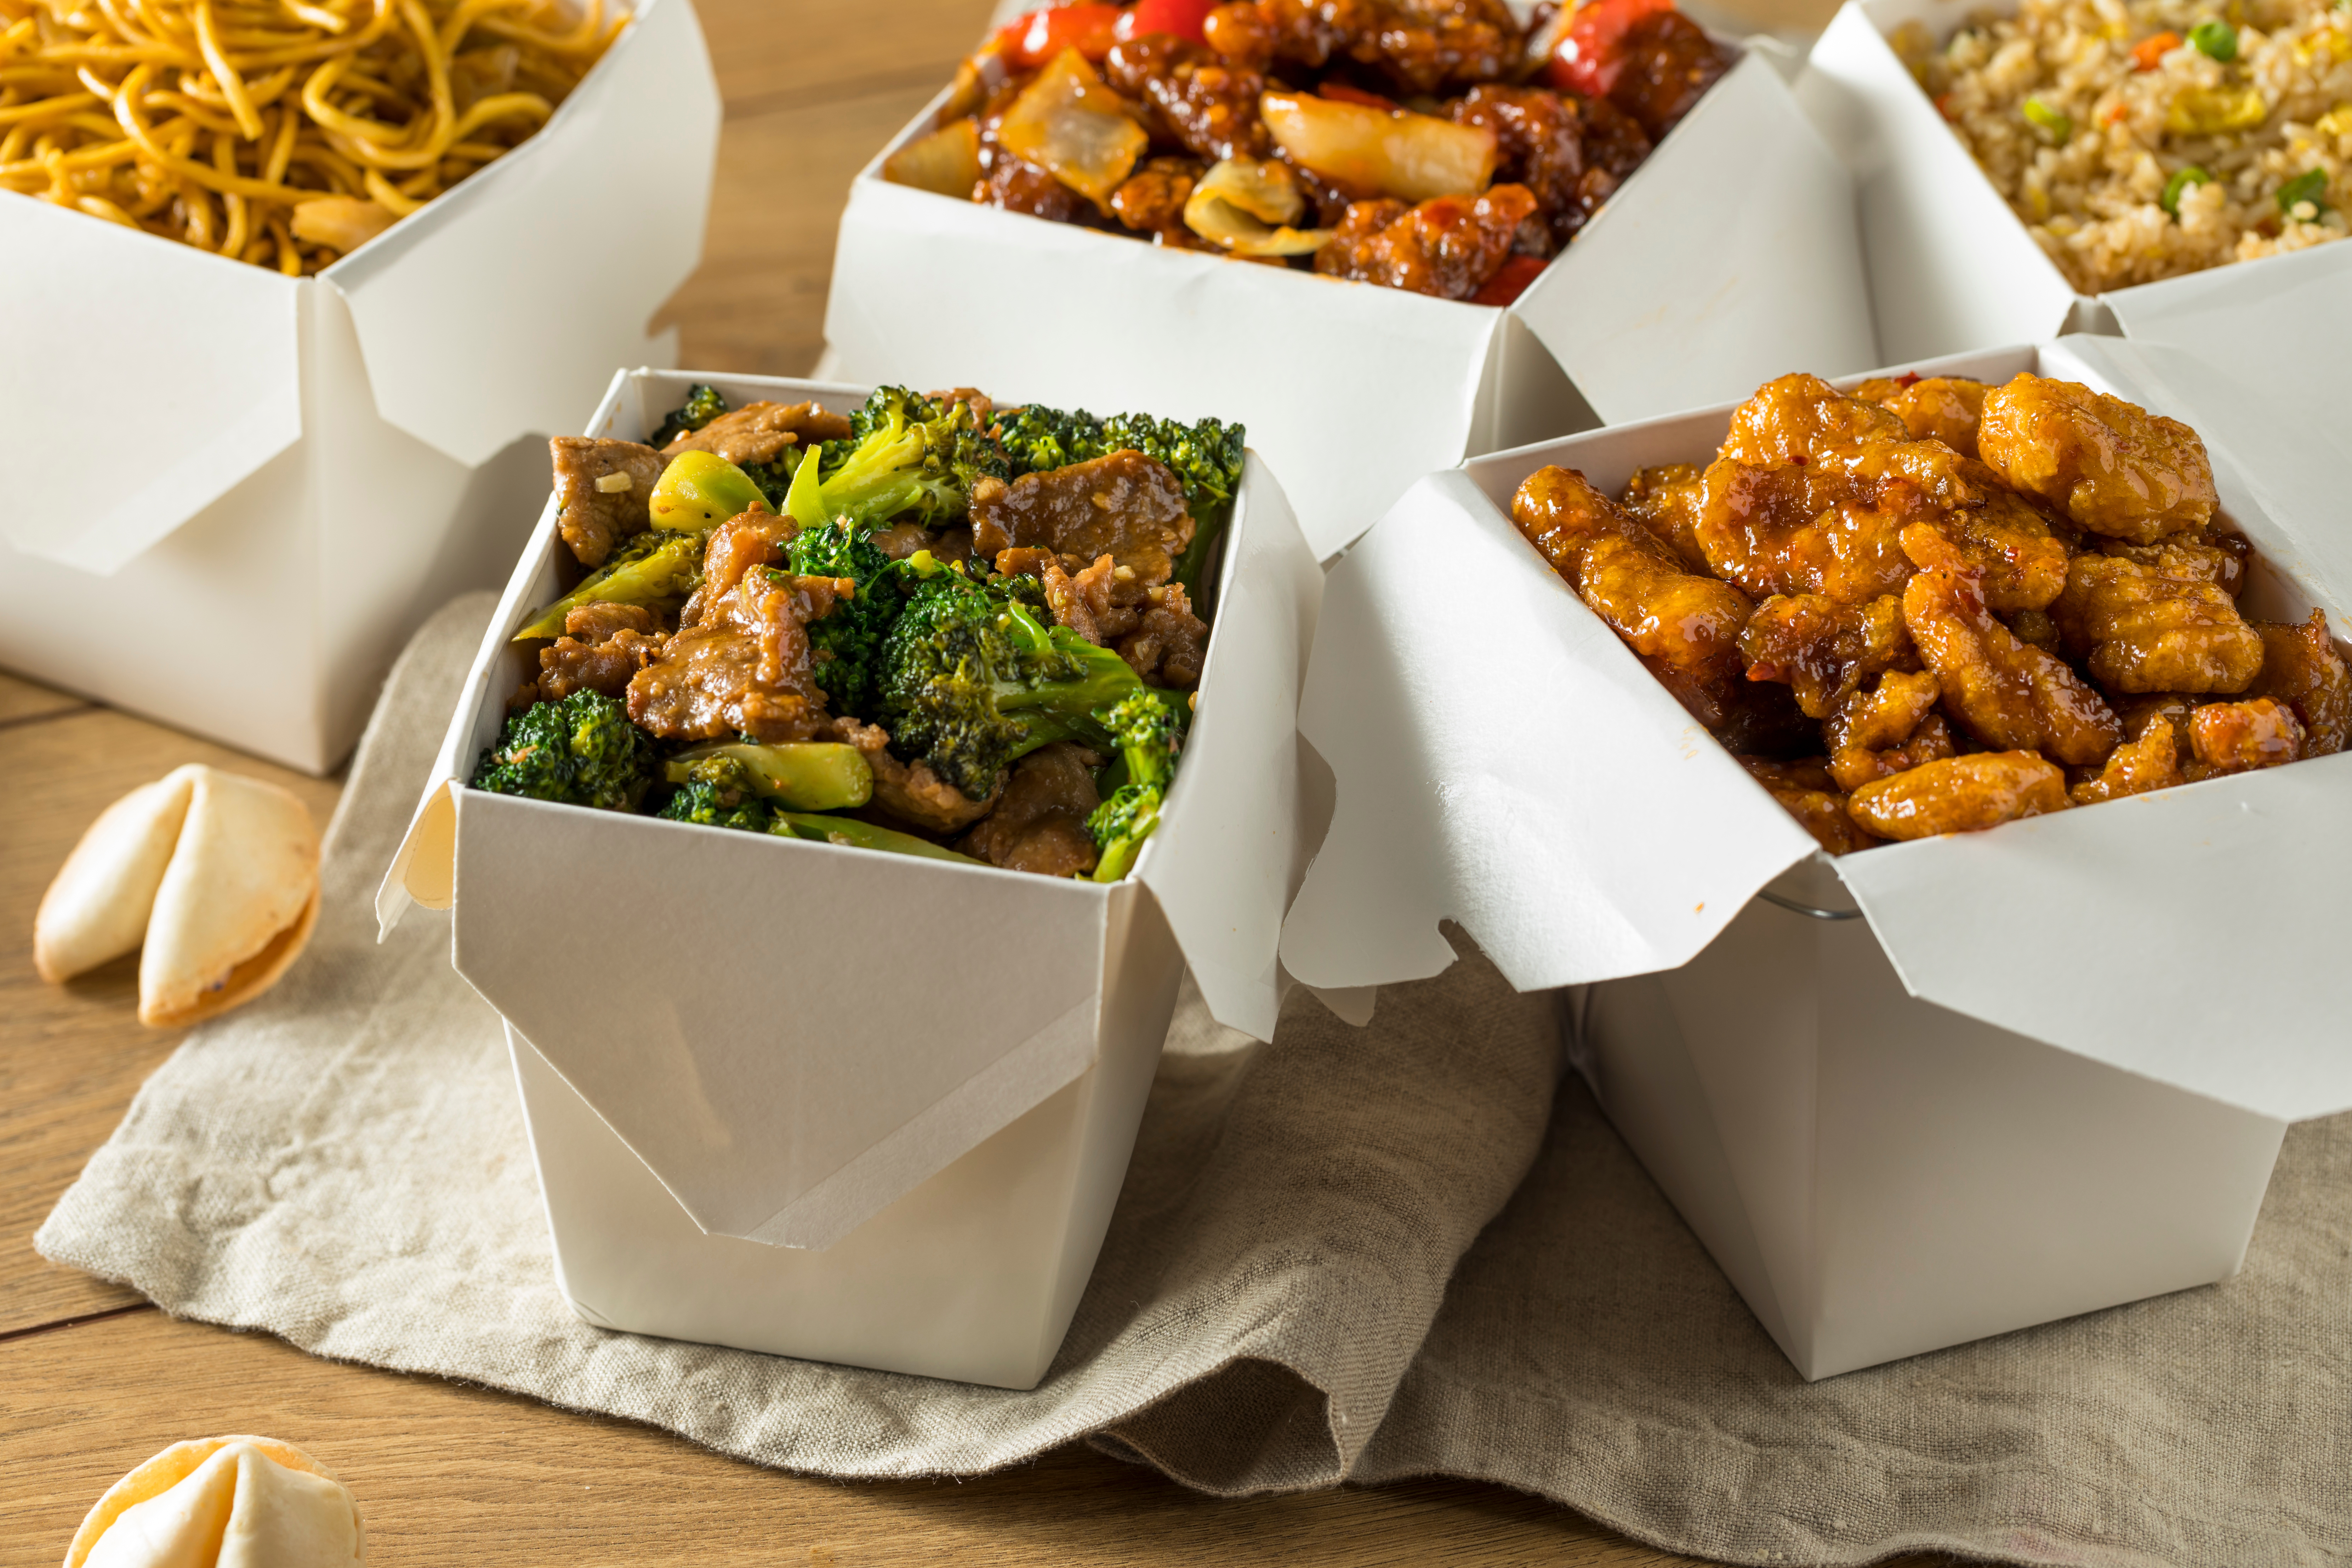 Boxes of takeout food | Source: Shutterstock